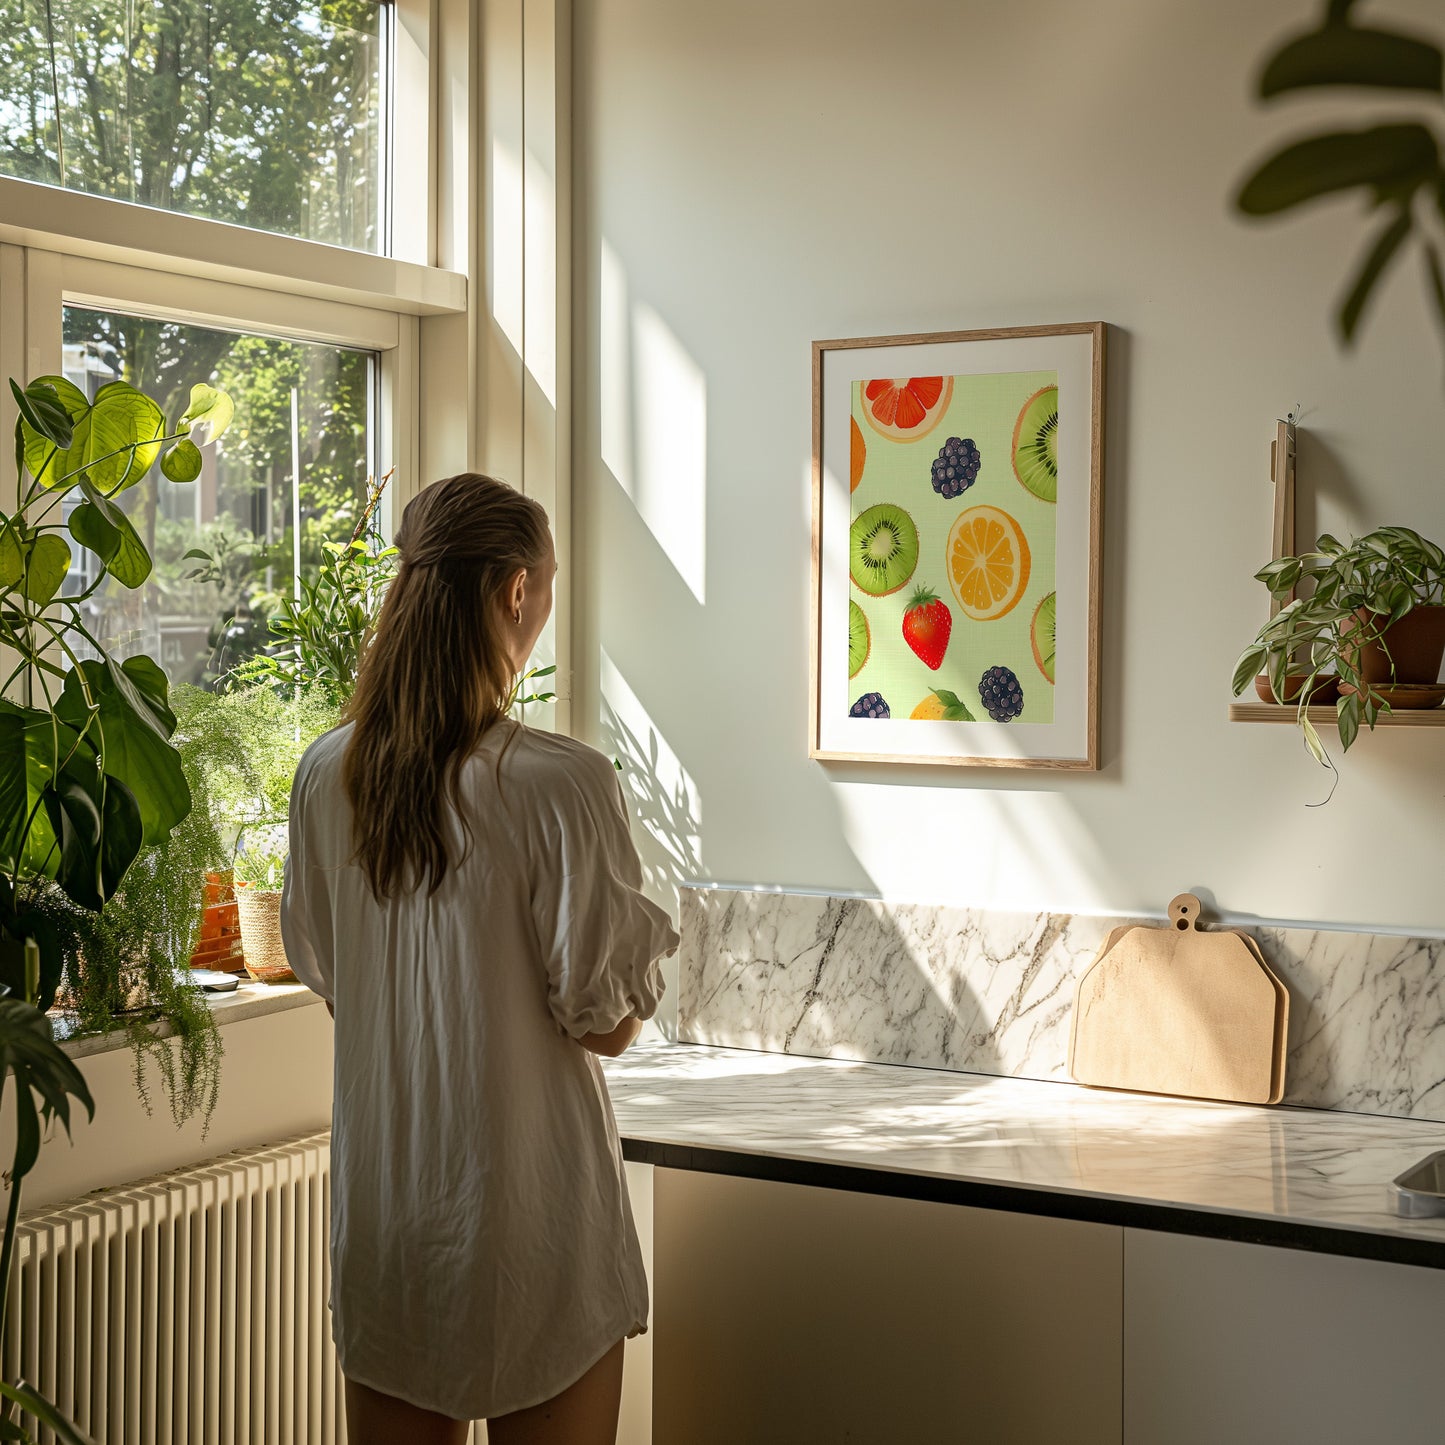 A person standing by a kitchen window with sunlight, looking at a fruit painting on the wall.